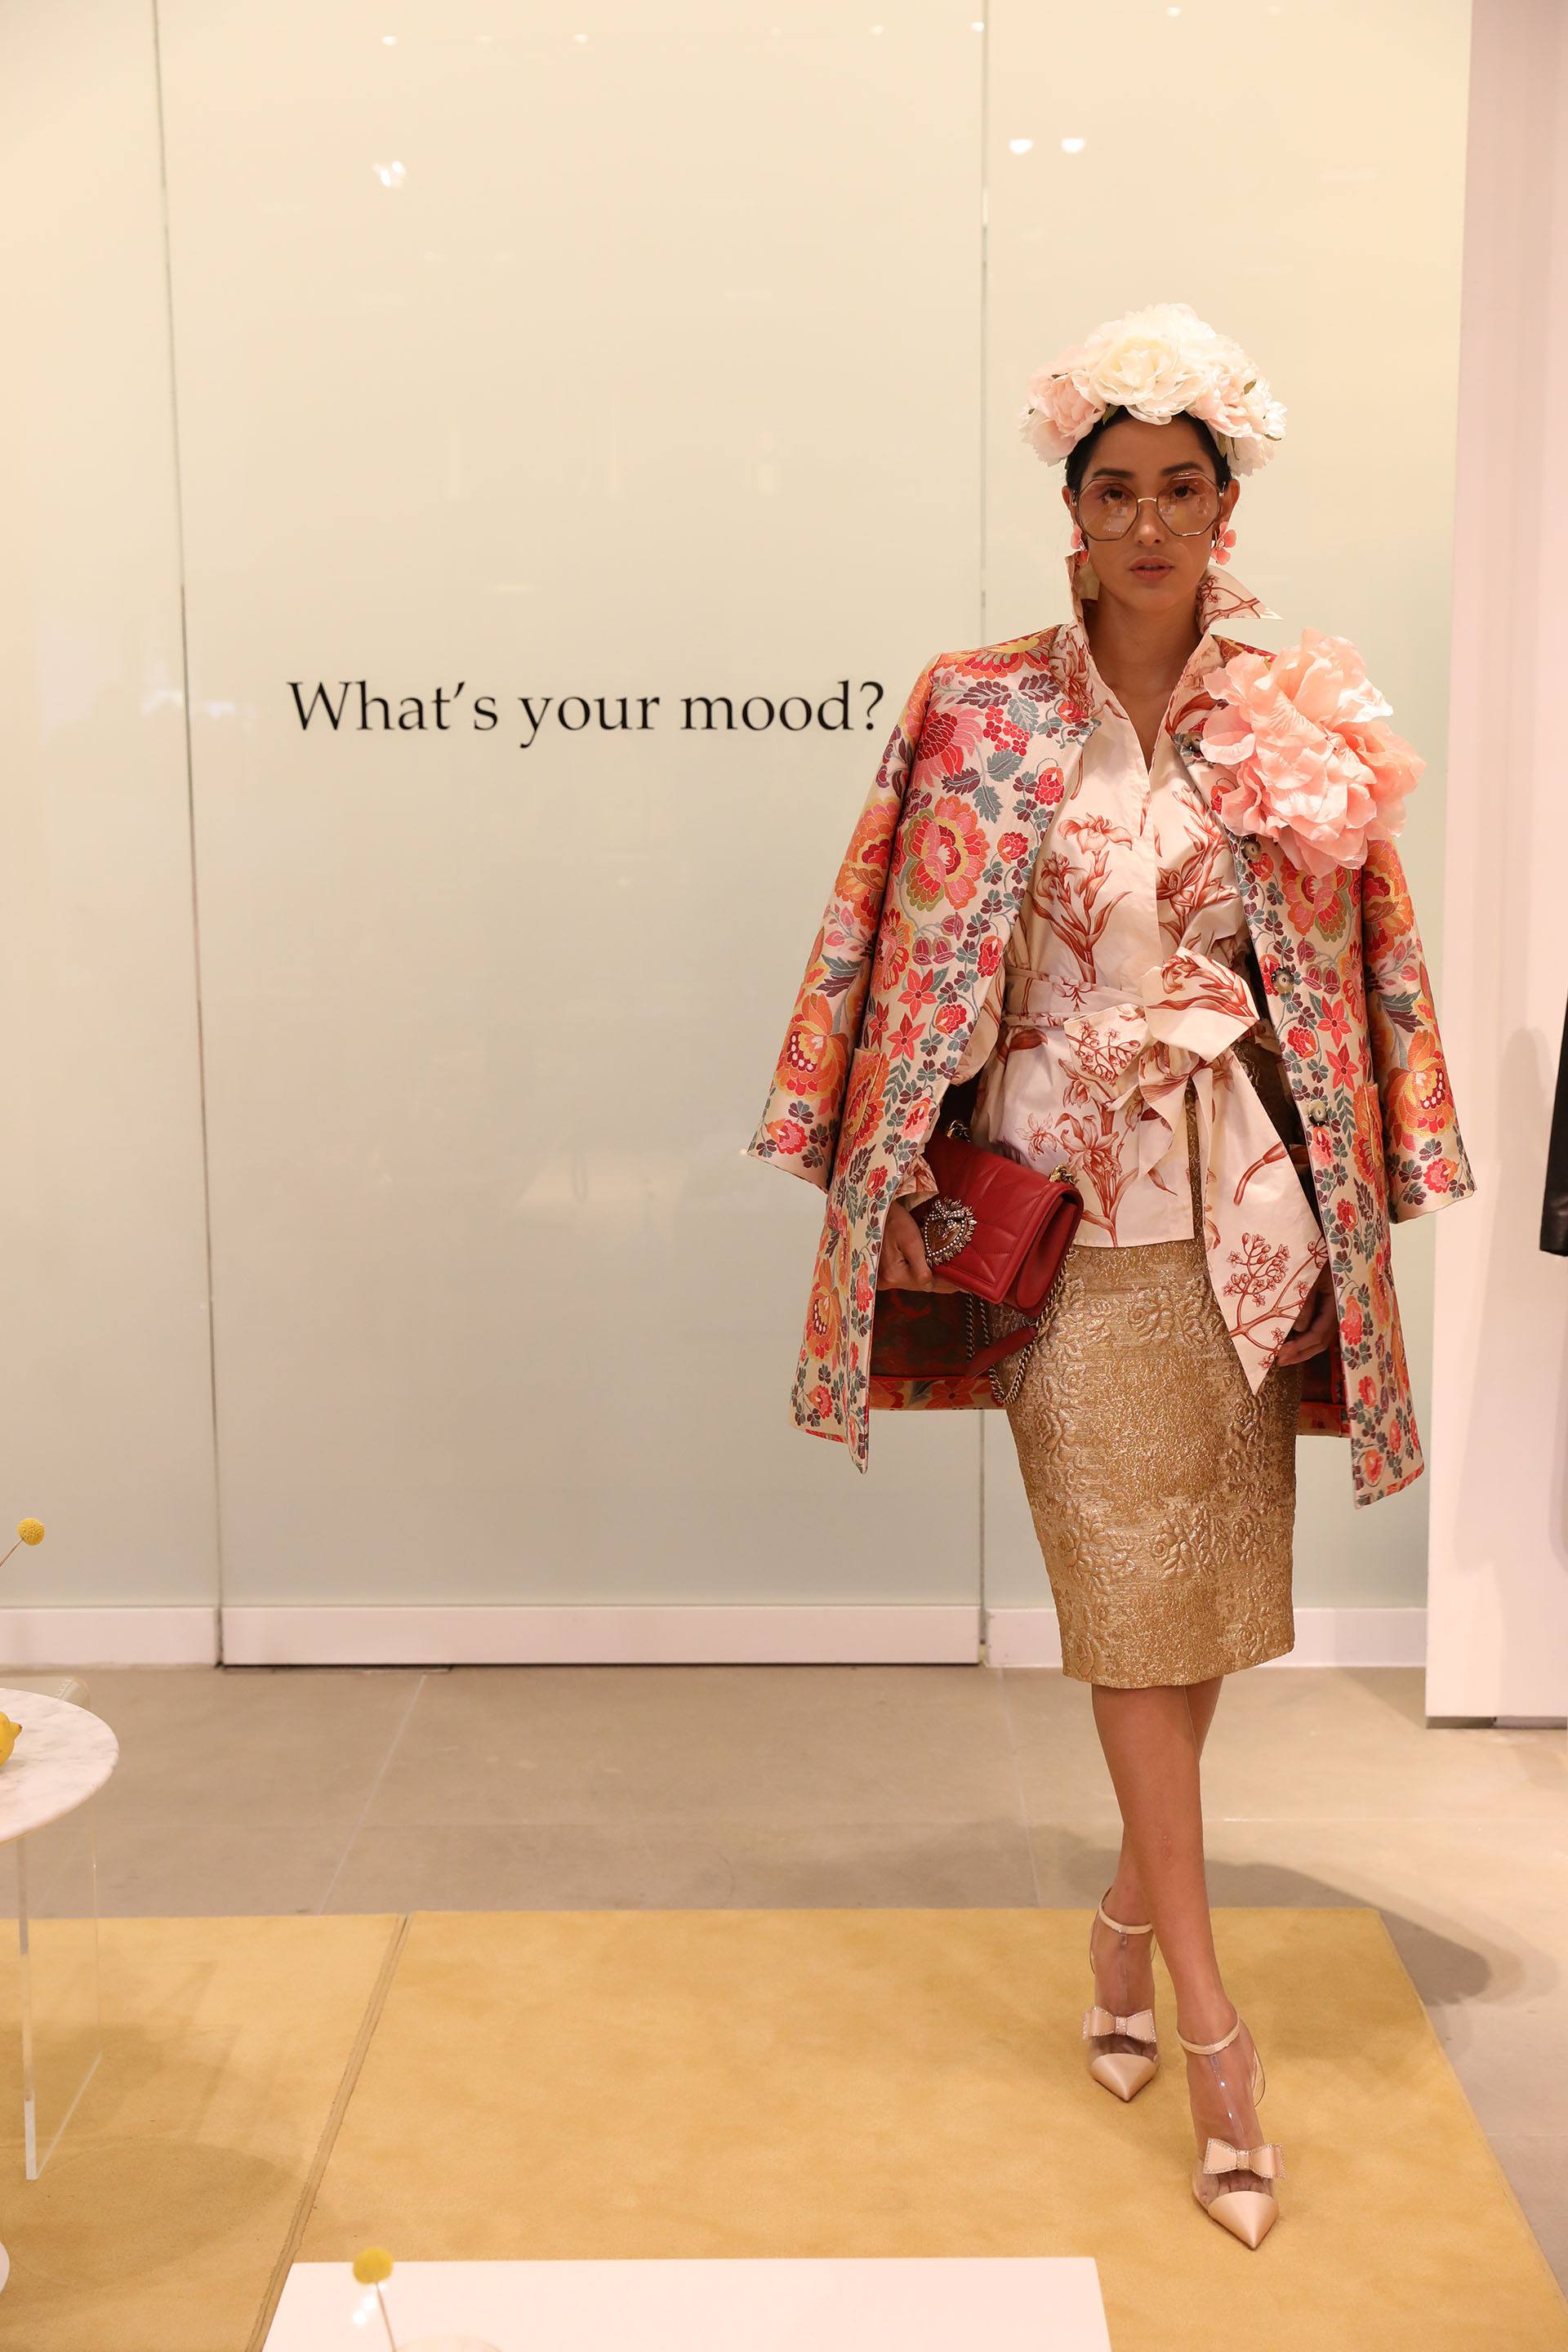 Model in the latest Spring 2019 collection from Neiman Marcus Bal Harbour